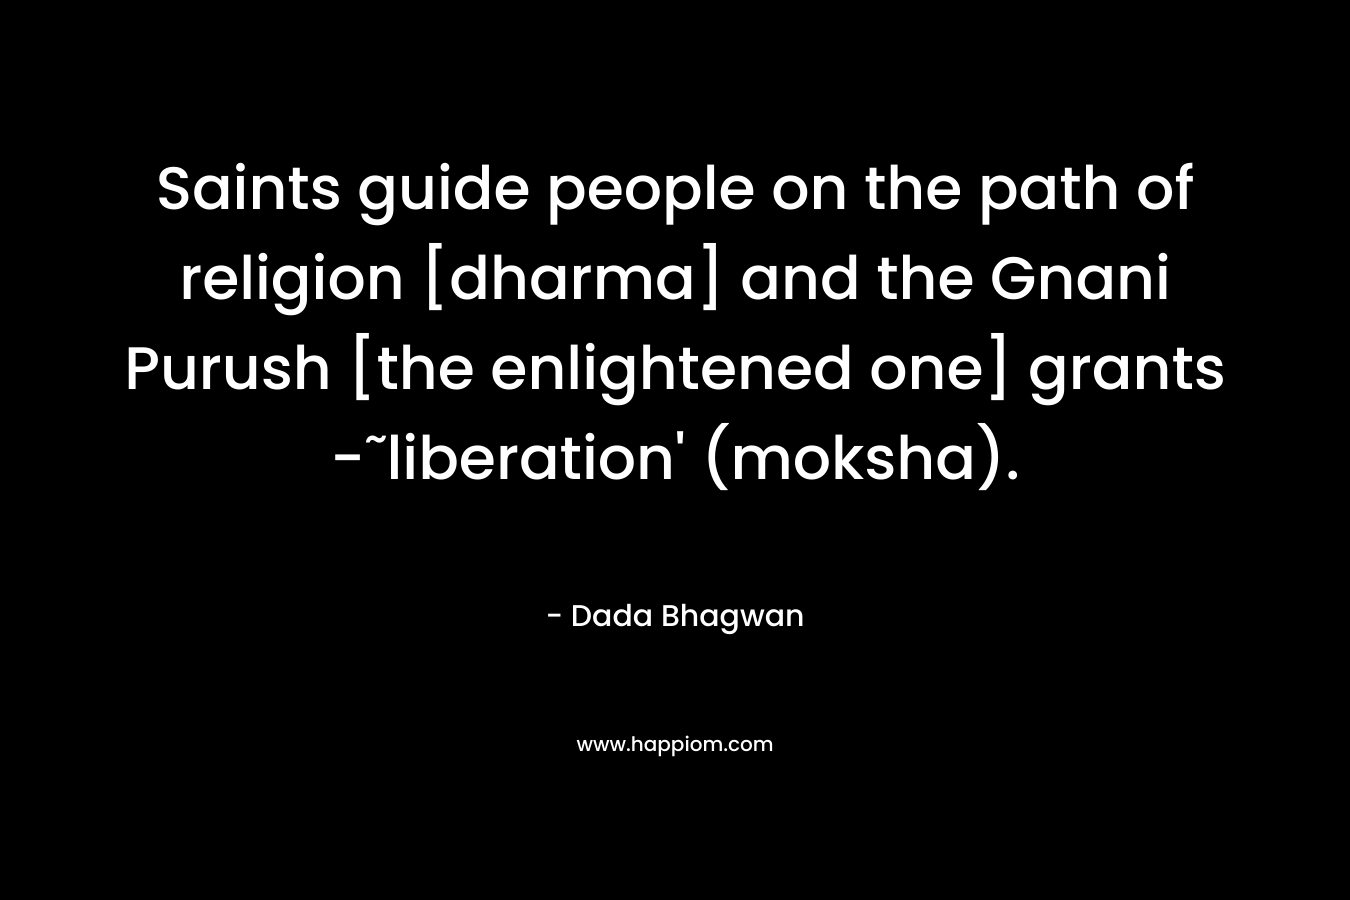 Saints guide people on the path of religion [dharma] and the Gnani Purush [the enlightened one] grants -˜liberation' (moksha).